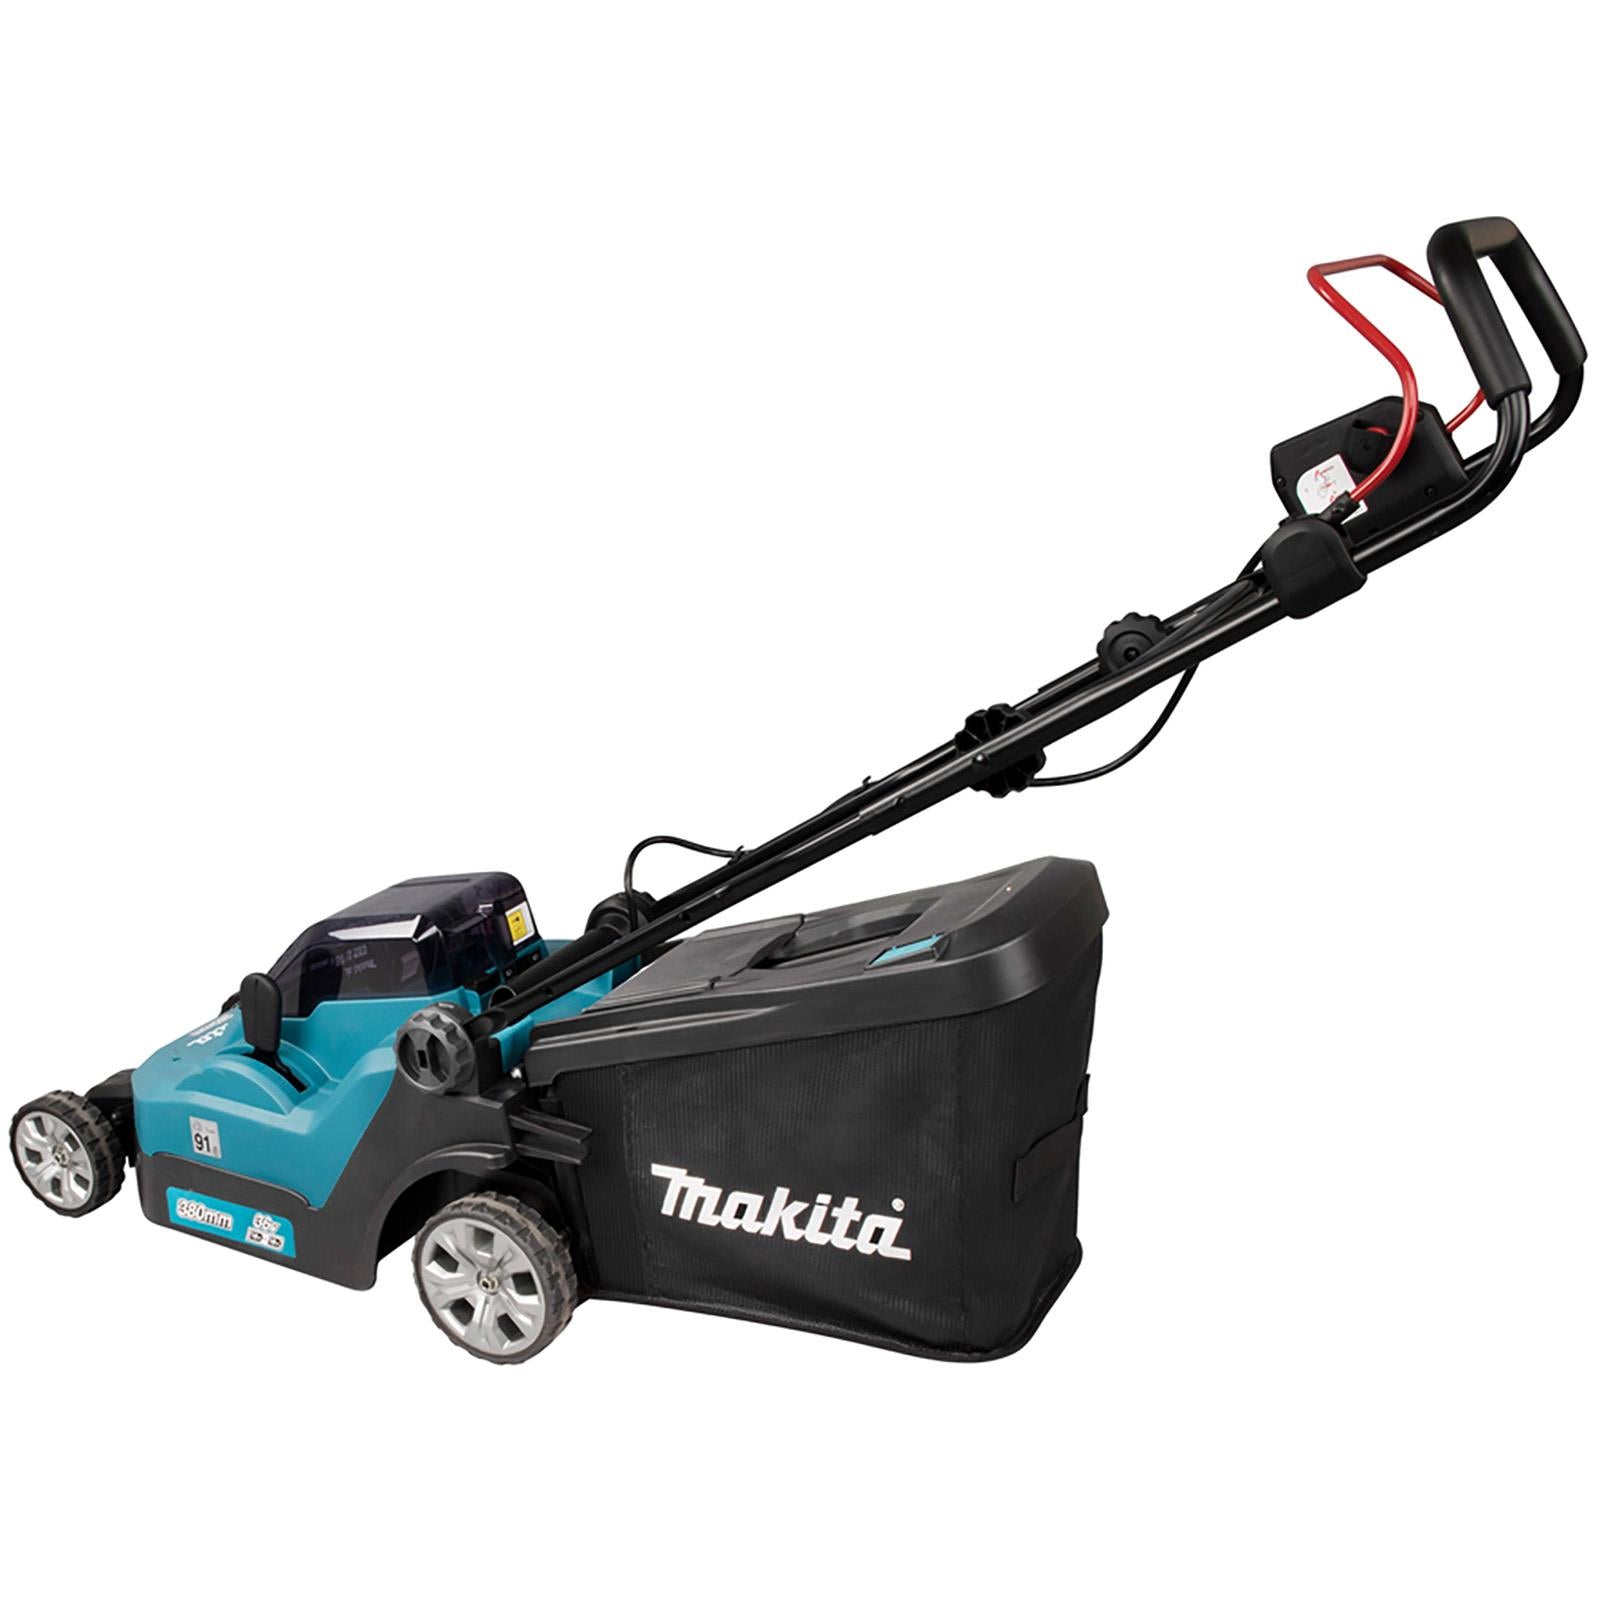 Makita 38cm Lawn Mower Kit Twin 18V LXT Li-ion Cordless Garden Grass Outdoor 2 x 6Ah Battery and Dual Rapid Charger DLM382PG2